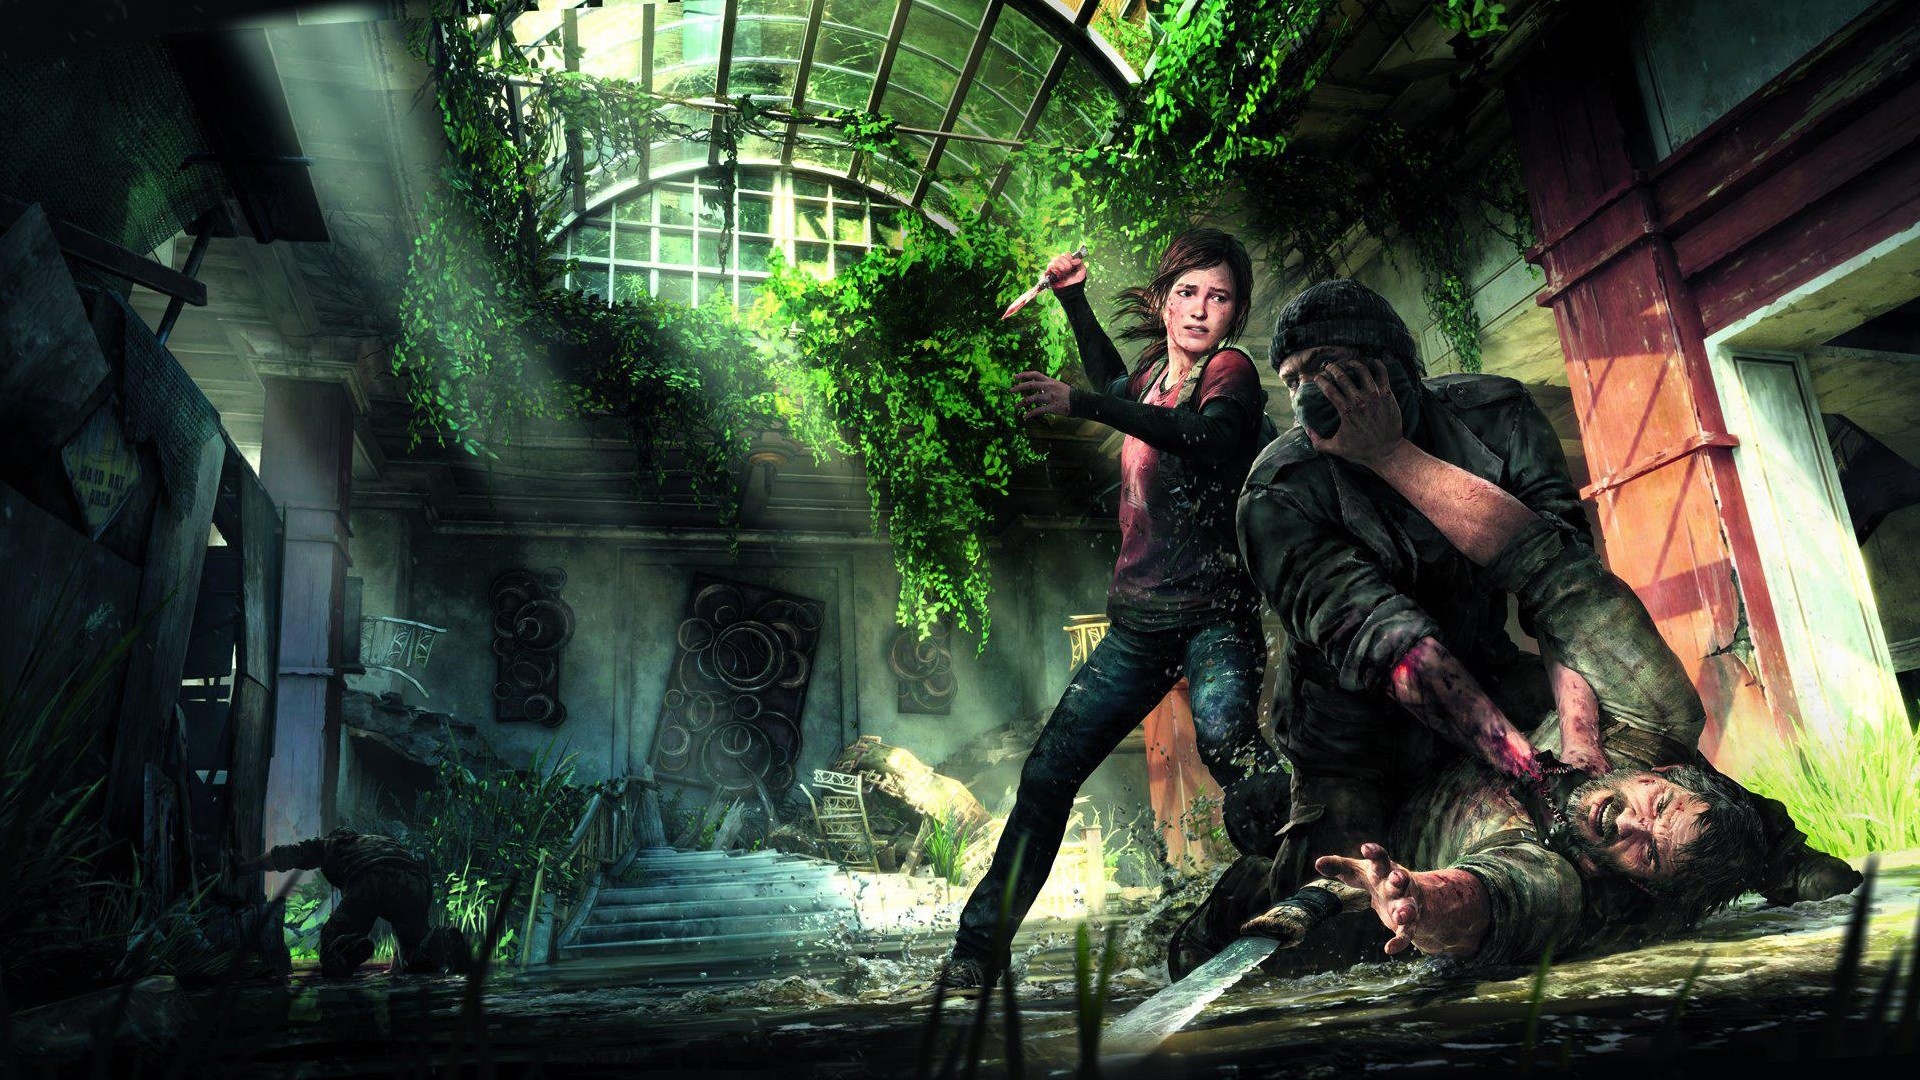 1920x1080 the last of us ps3 game wallpaper. 